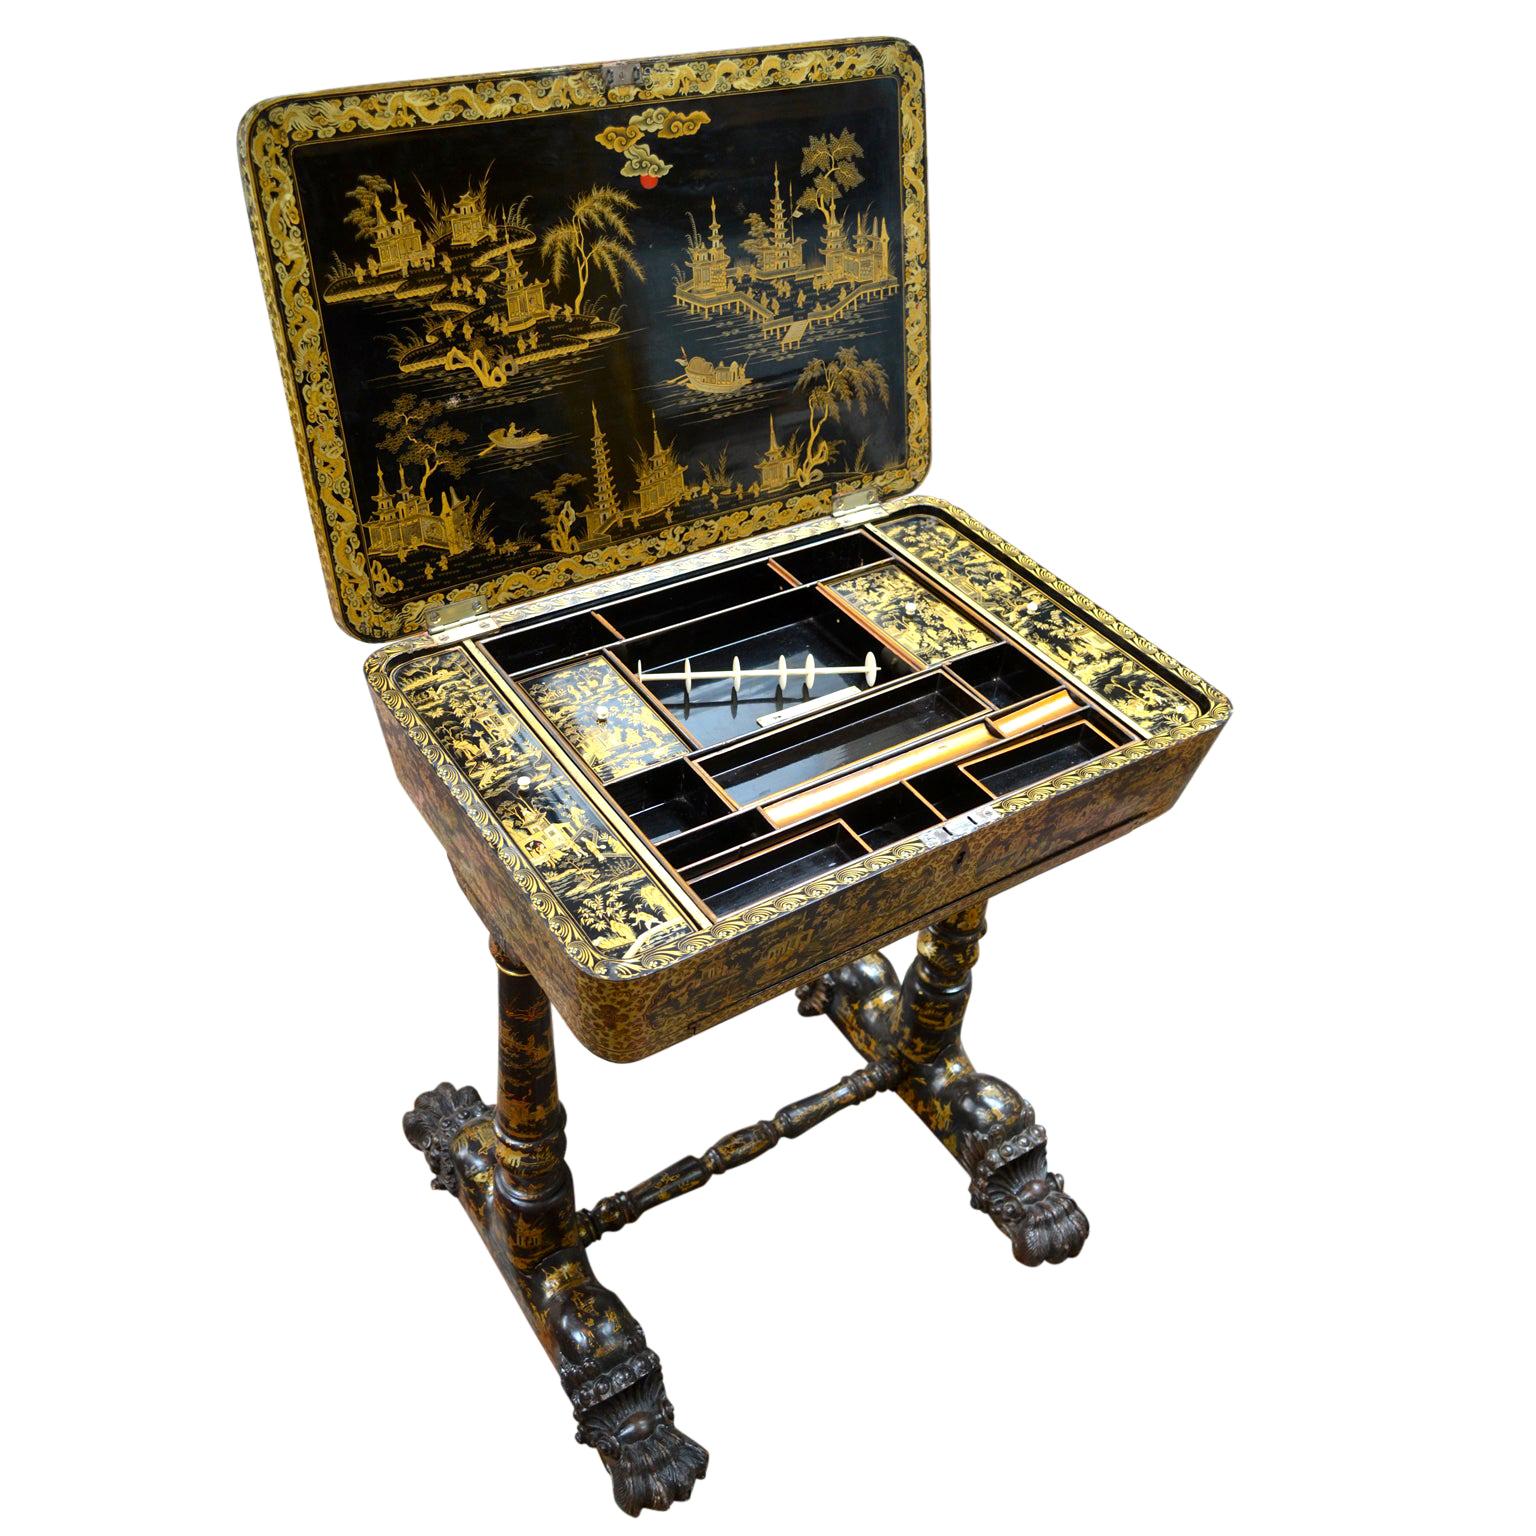 Chinese antique sewing table, black lacquer with beautiful and ornate gold lacquer designs depicting scenes of palace life, the case showing a composition of figures in an elaborate pavilion garden. This is unusual in that the whole area is covered